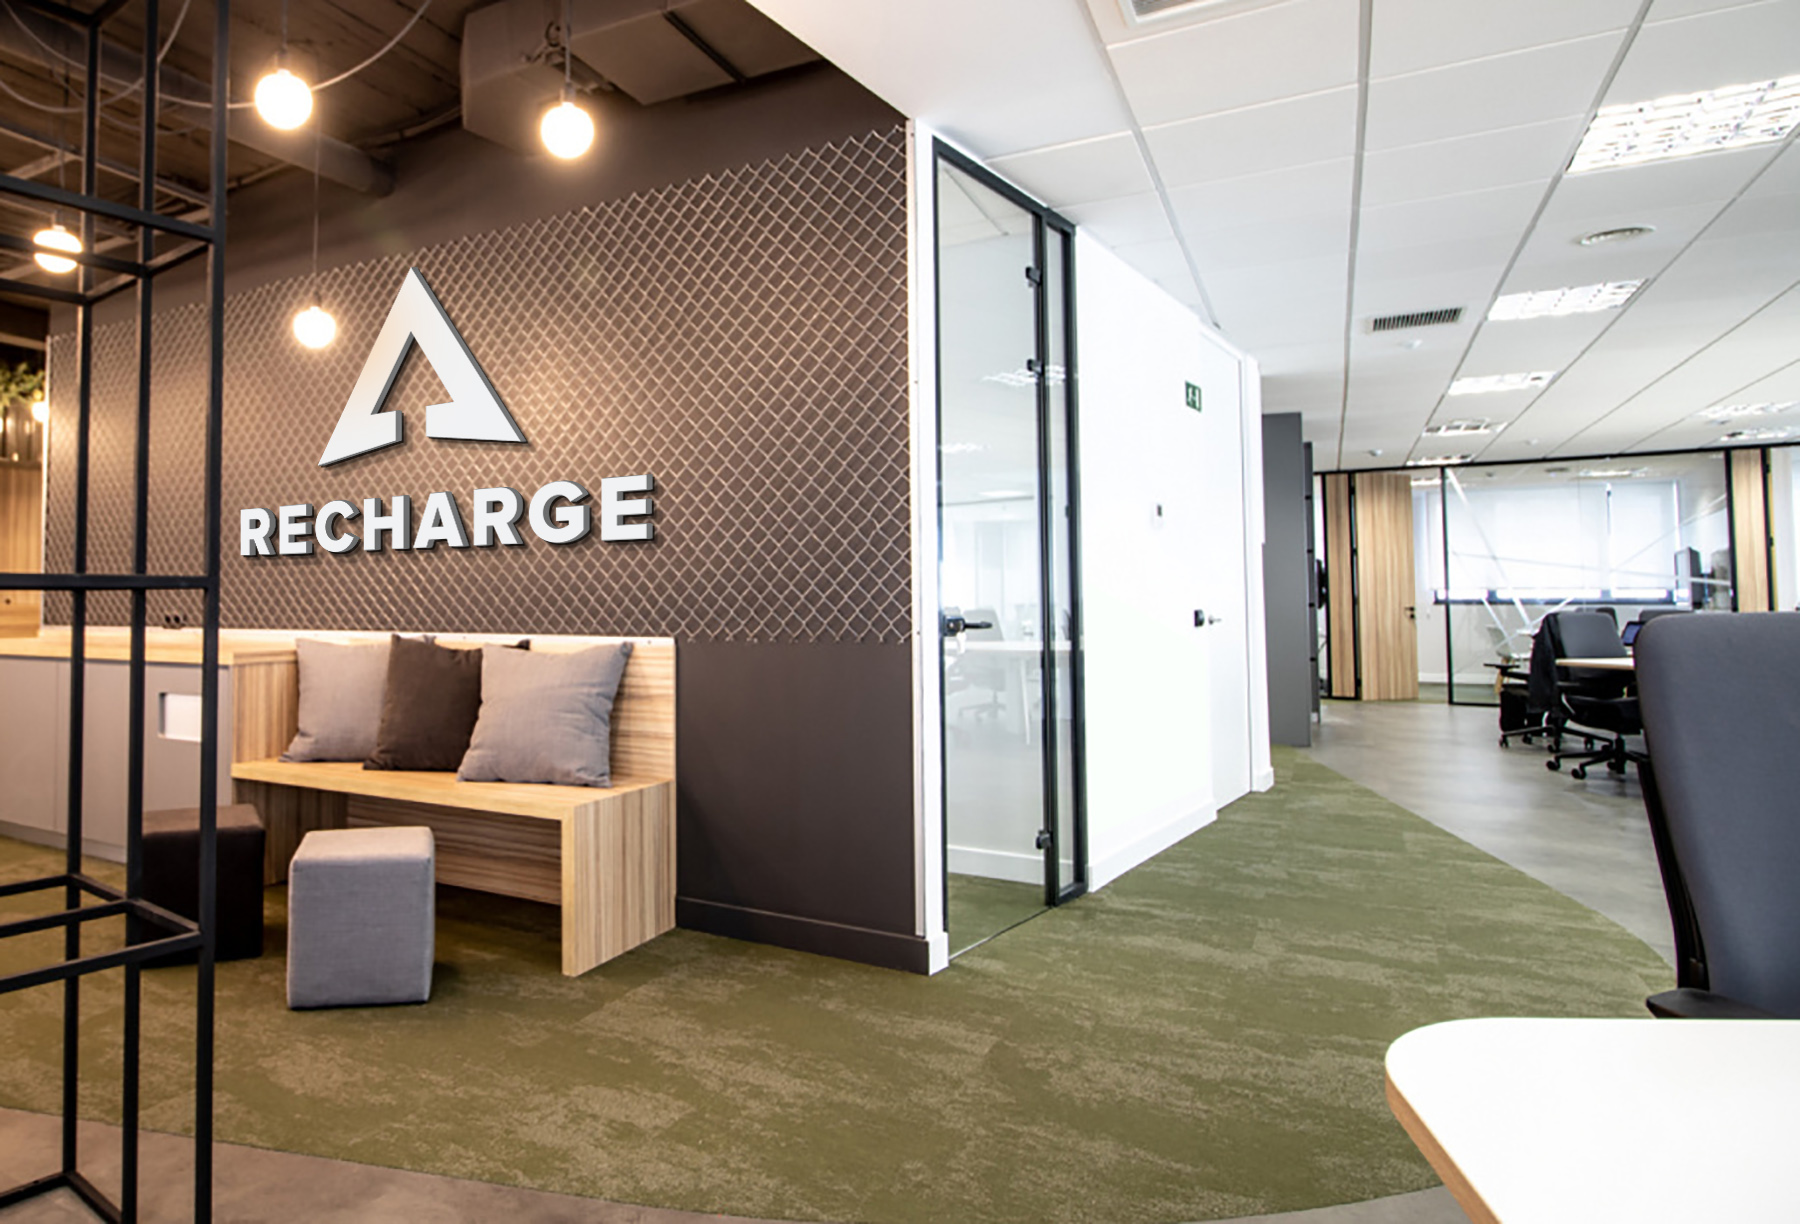 Recharge Wellness Treatment Rooms in a Tech company office